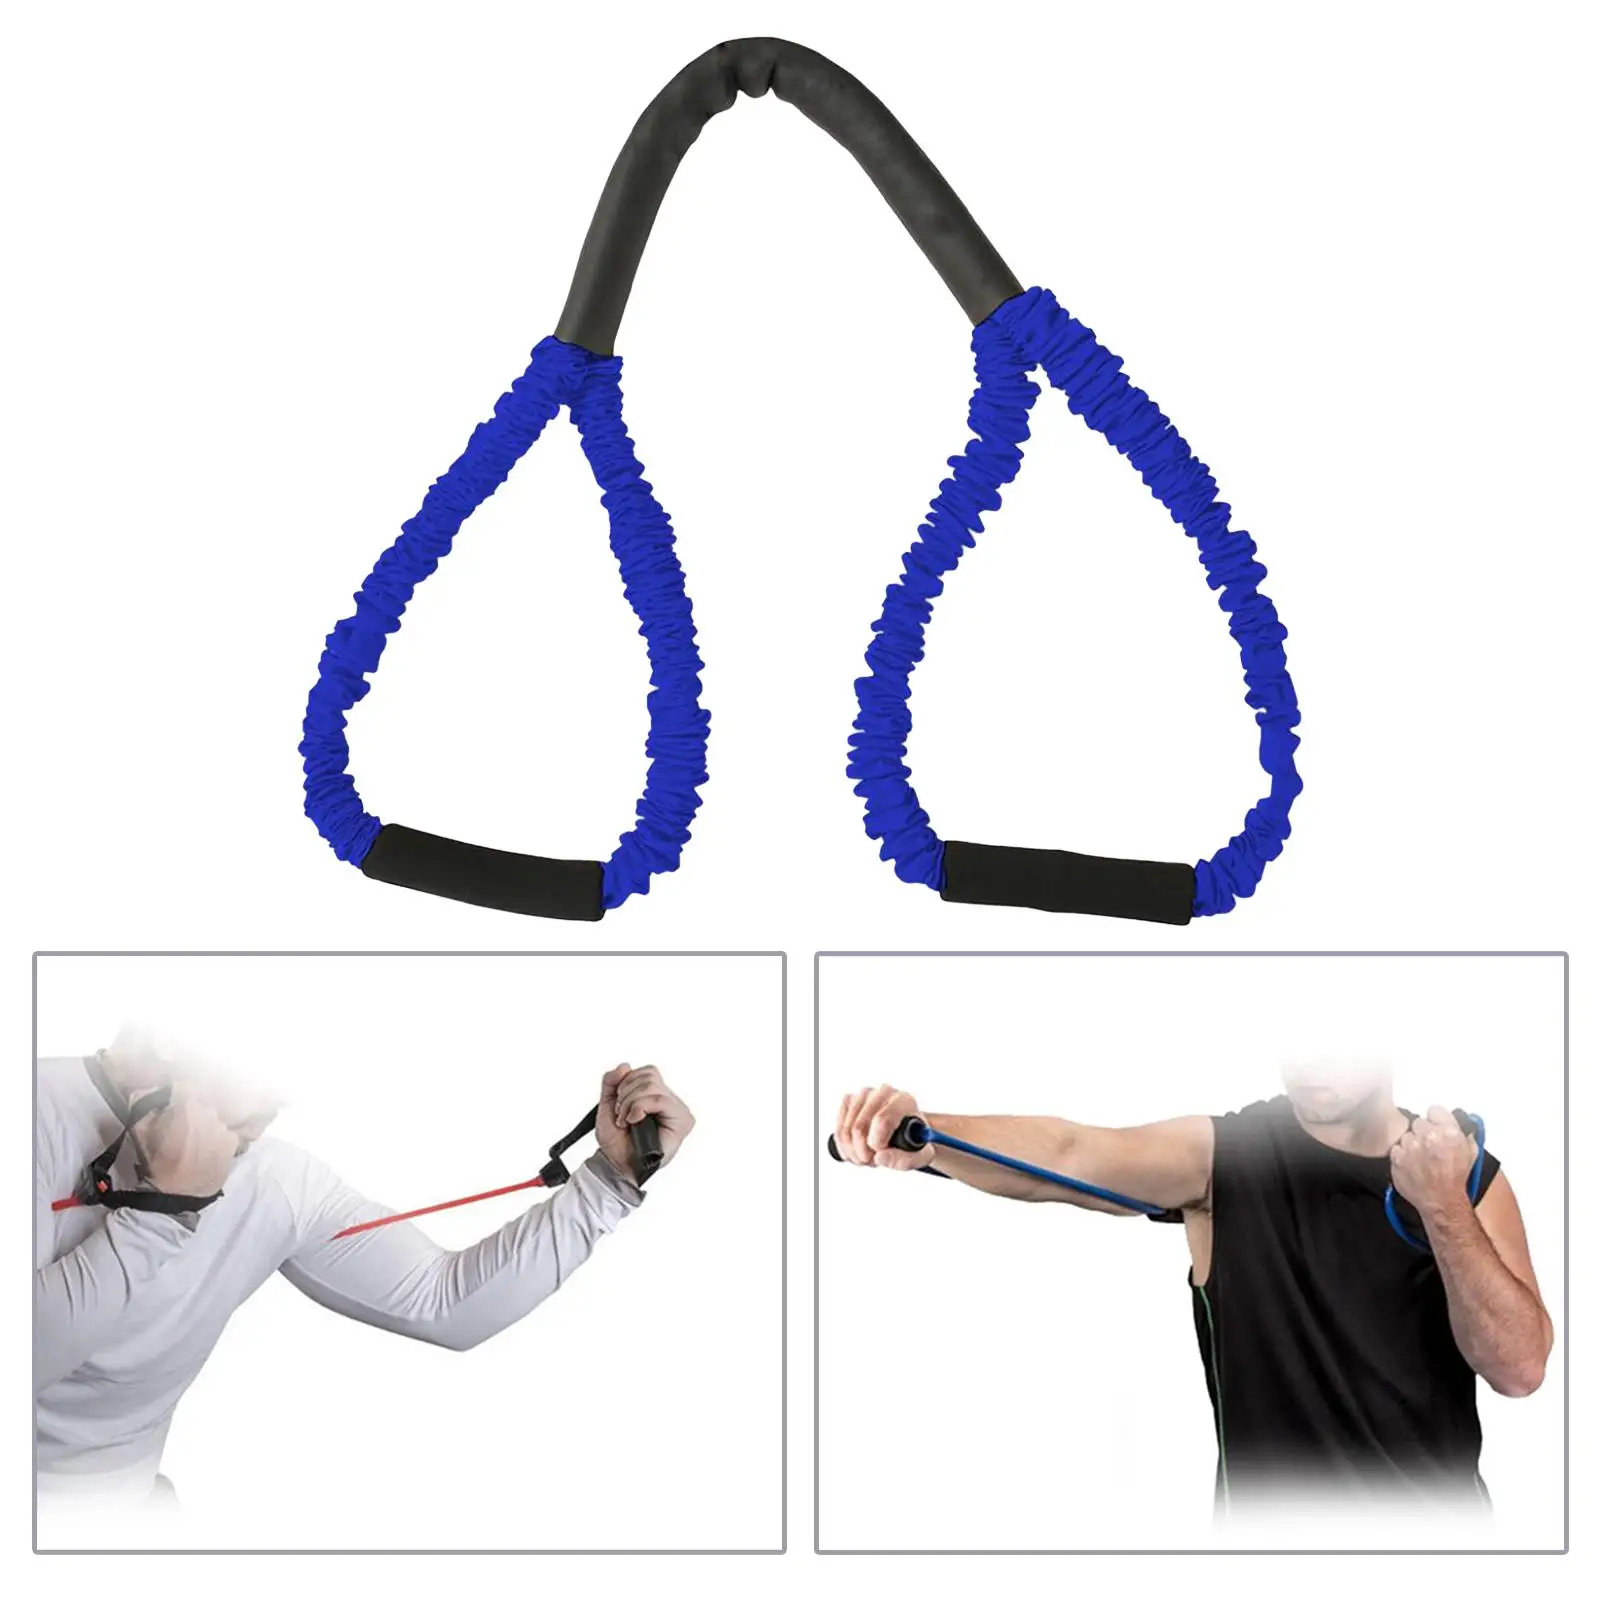 Boxing Resistance Bands Home Gym Basketball for Legs Arm Exercise Bands